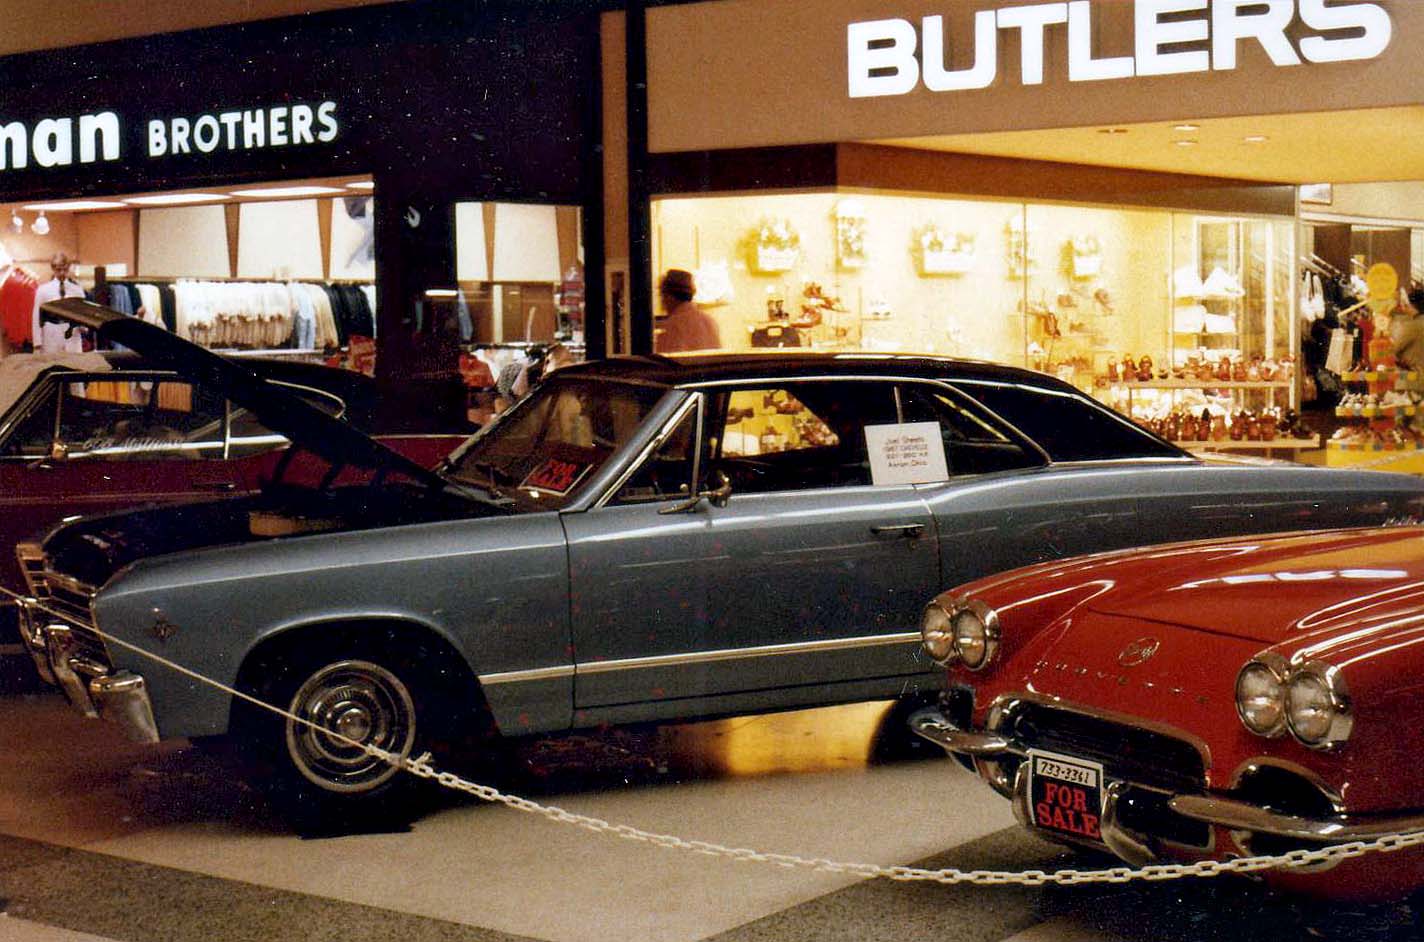 Car show at Chapel Hill Mall in Akron, Ohio, 1977. My friends and I put our cars in this show. This mall recently lost it's last Anchor and shut down for good. View full size.